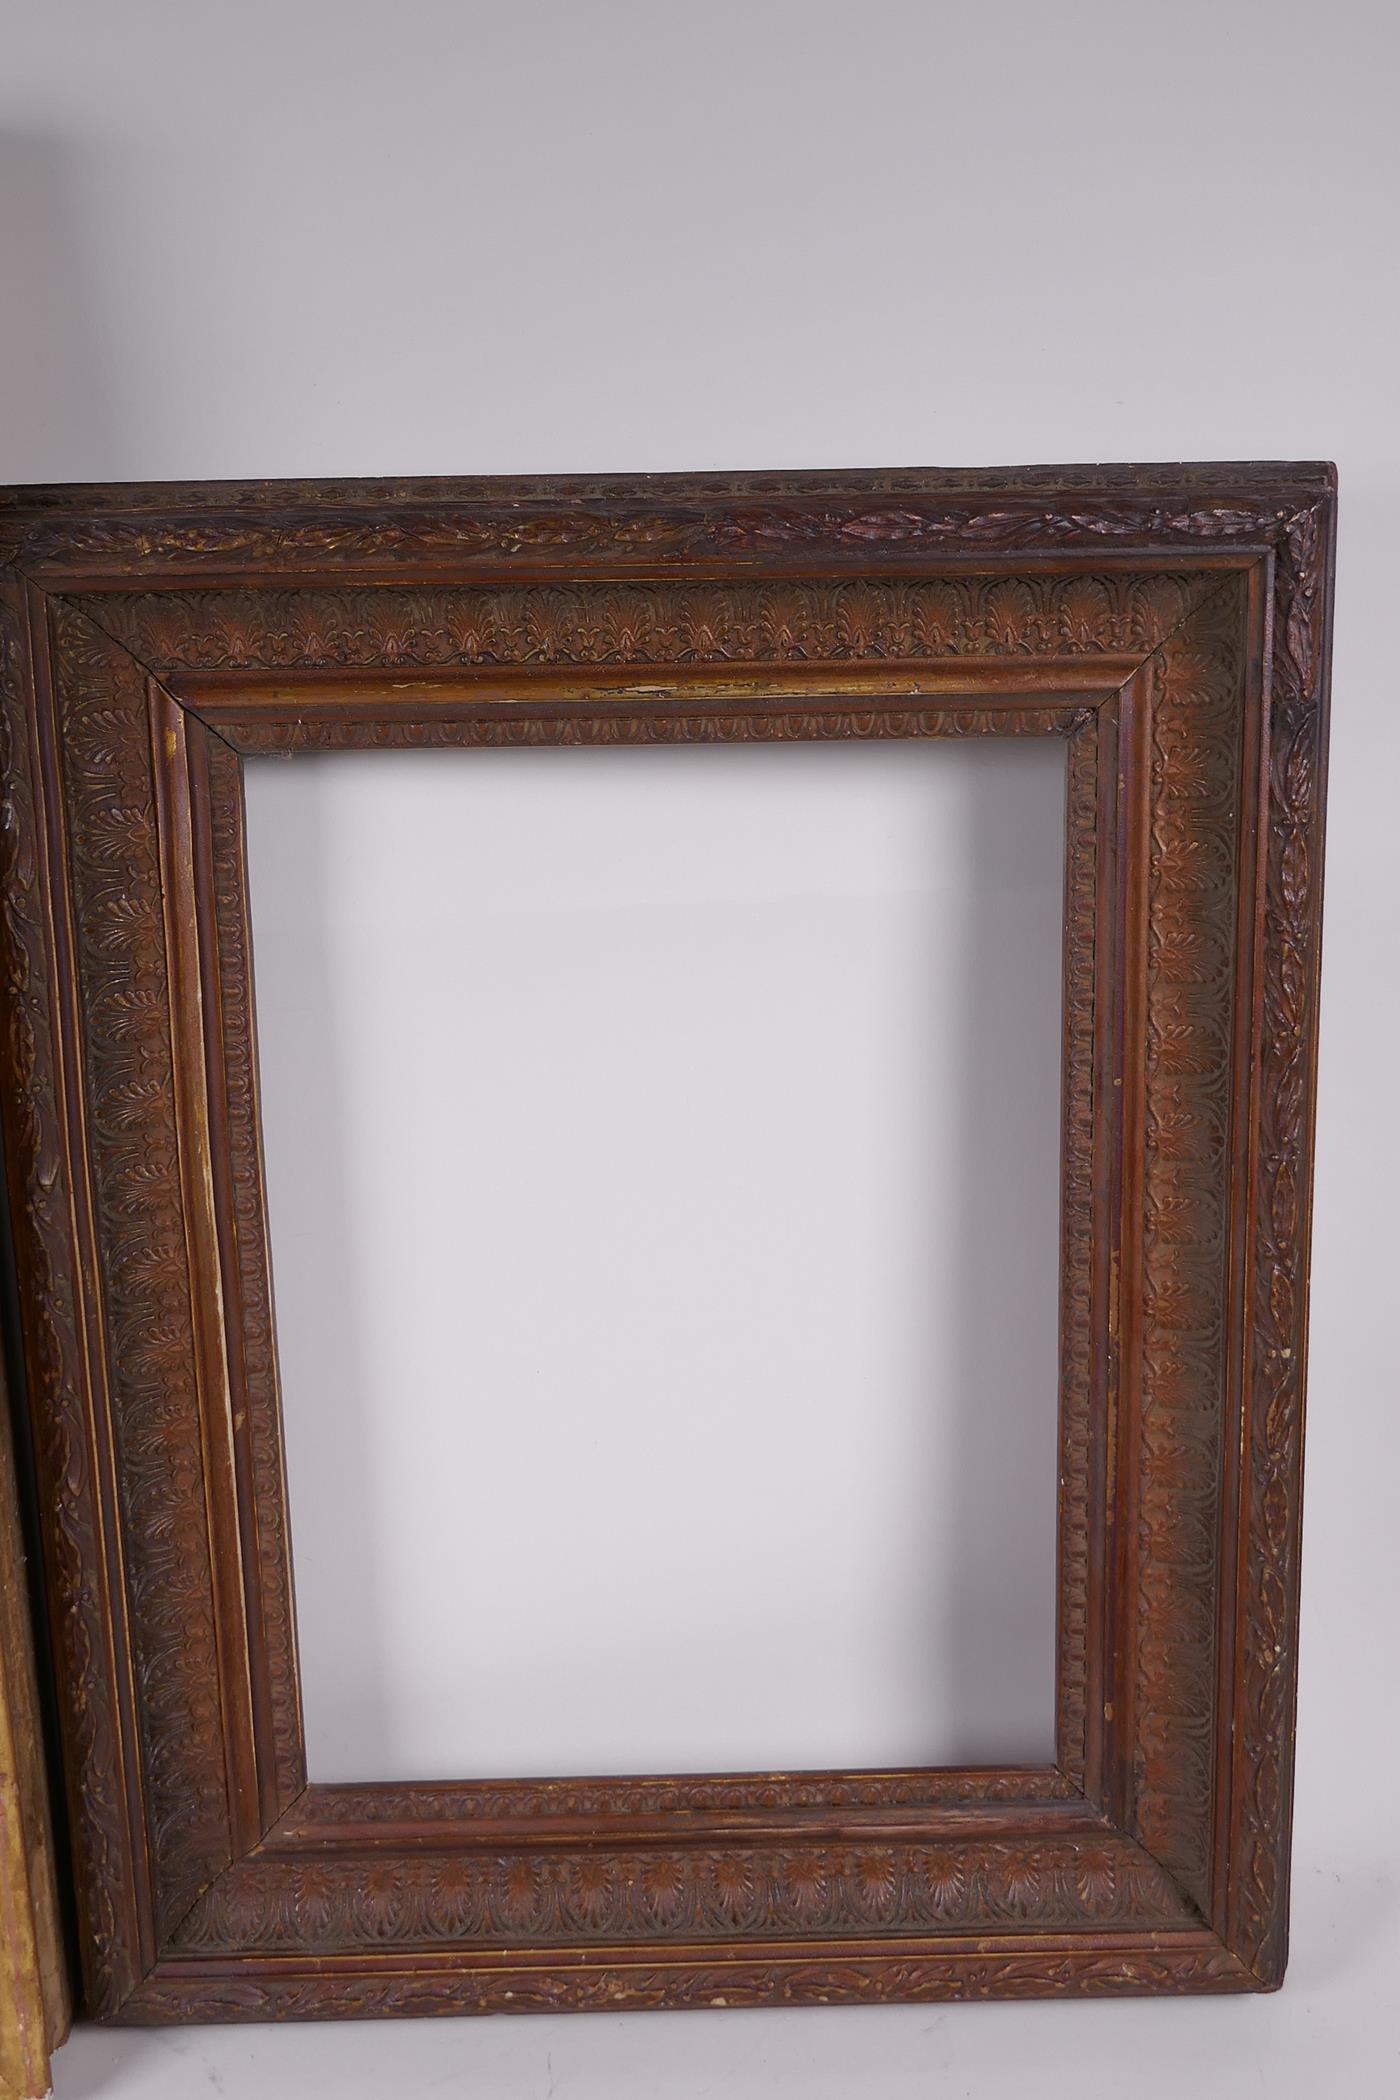 A C19th swept gilt picture frame, rebate3 17" x 9", together with a good gilt plaster frame, - Image 3 of 3